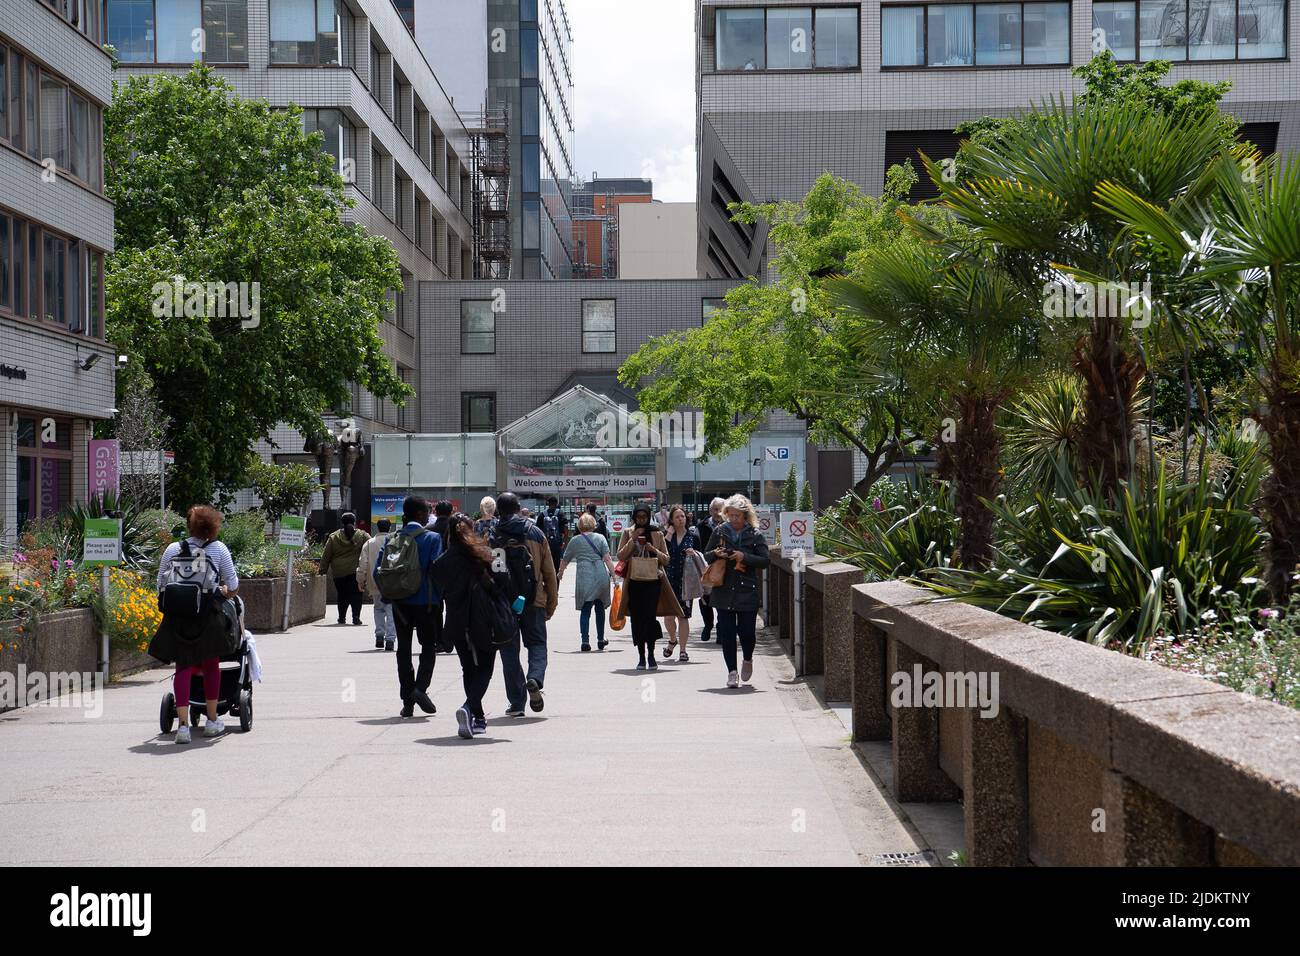 Westminster, London, UK. 8th June, 2022. A very busy day at St Thomas's Hospital in London. Credit: Maureen McLean/Alamy Stock Photo